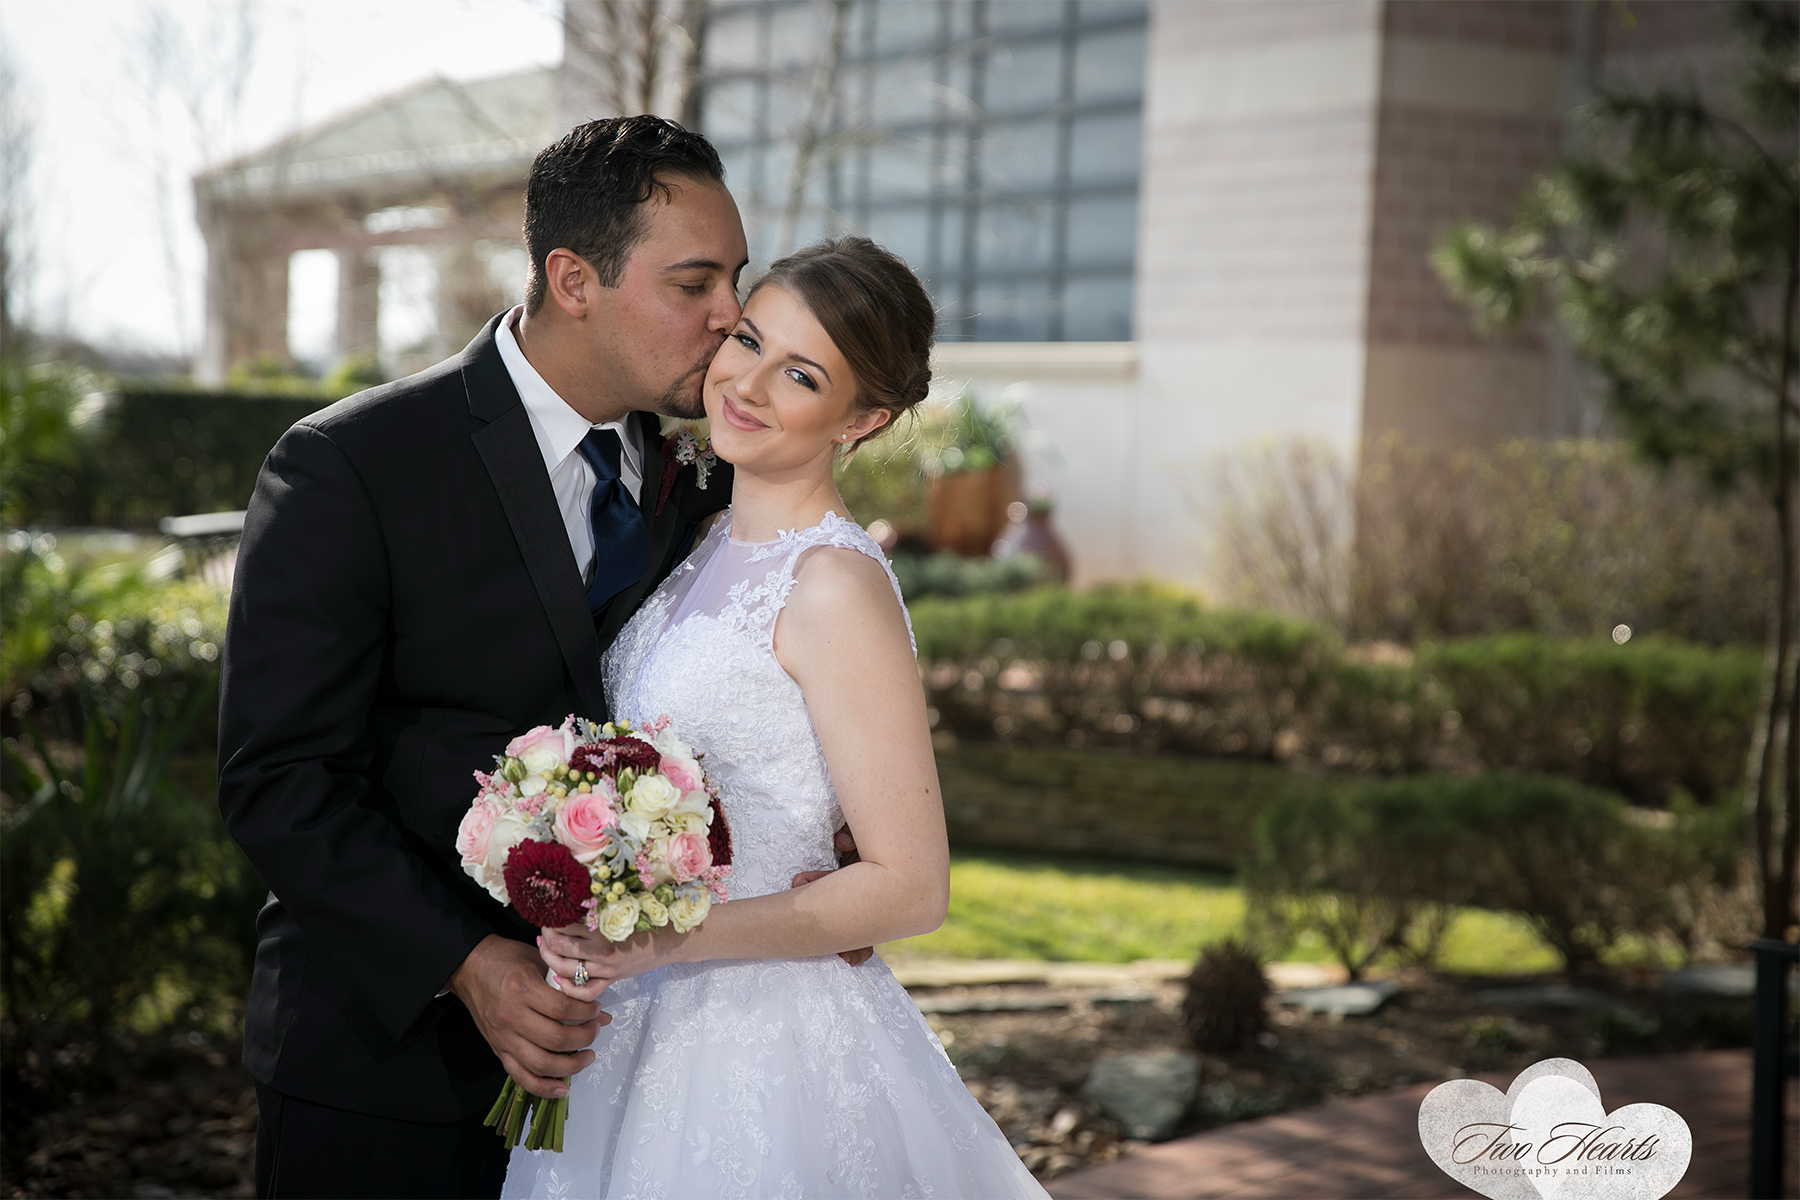 Creating Timeless Images With Your Pearland Wedding Photographer